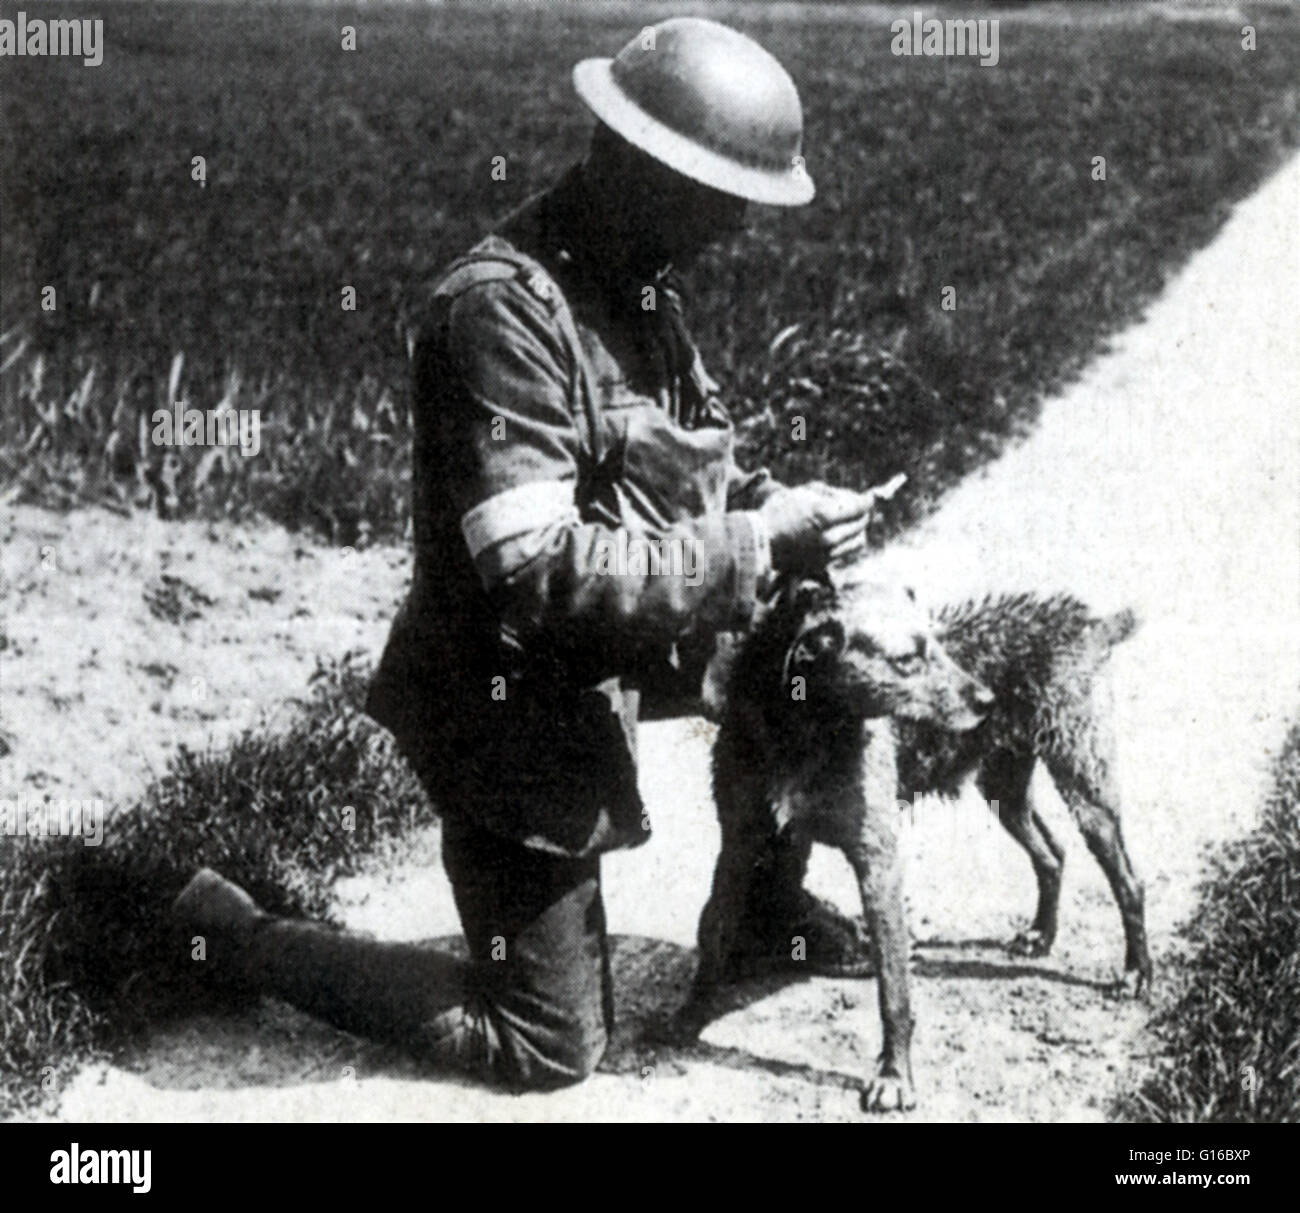 what were dogs used for in war